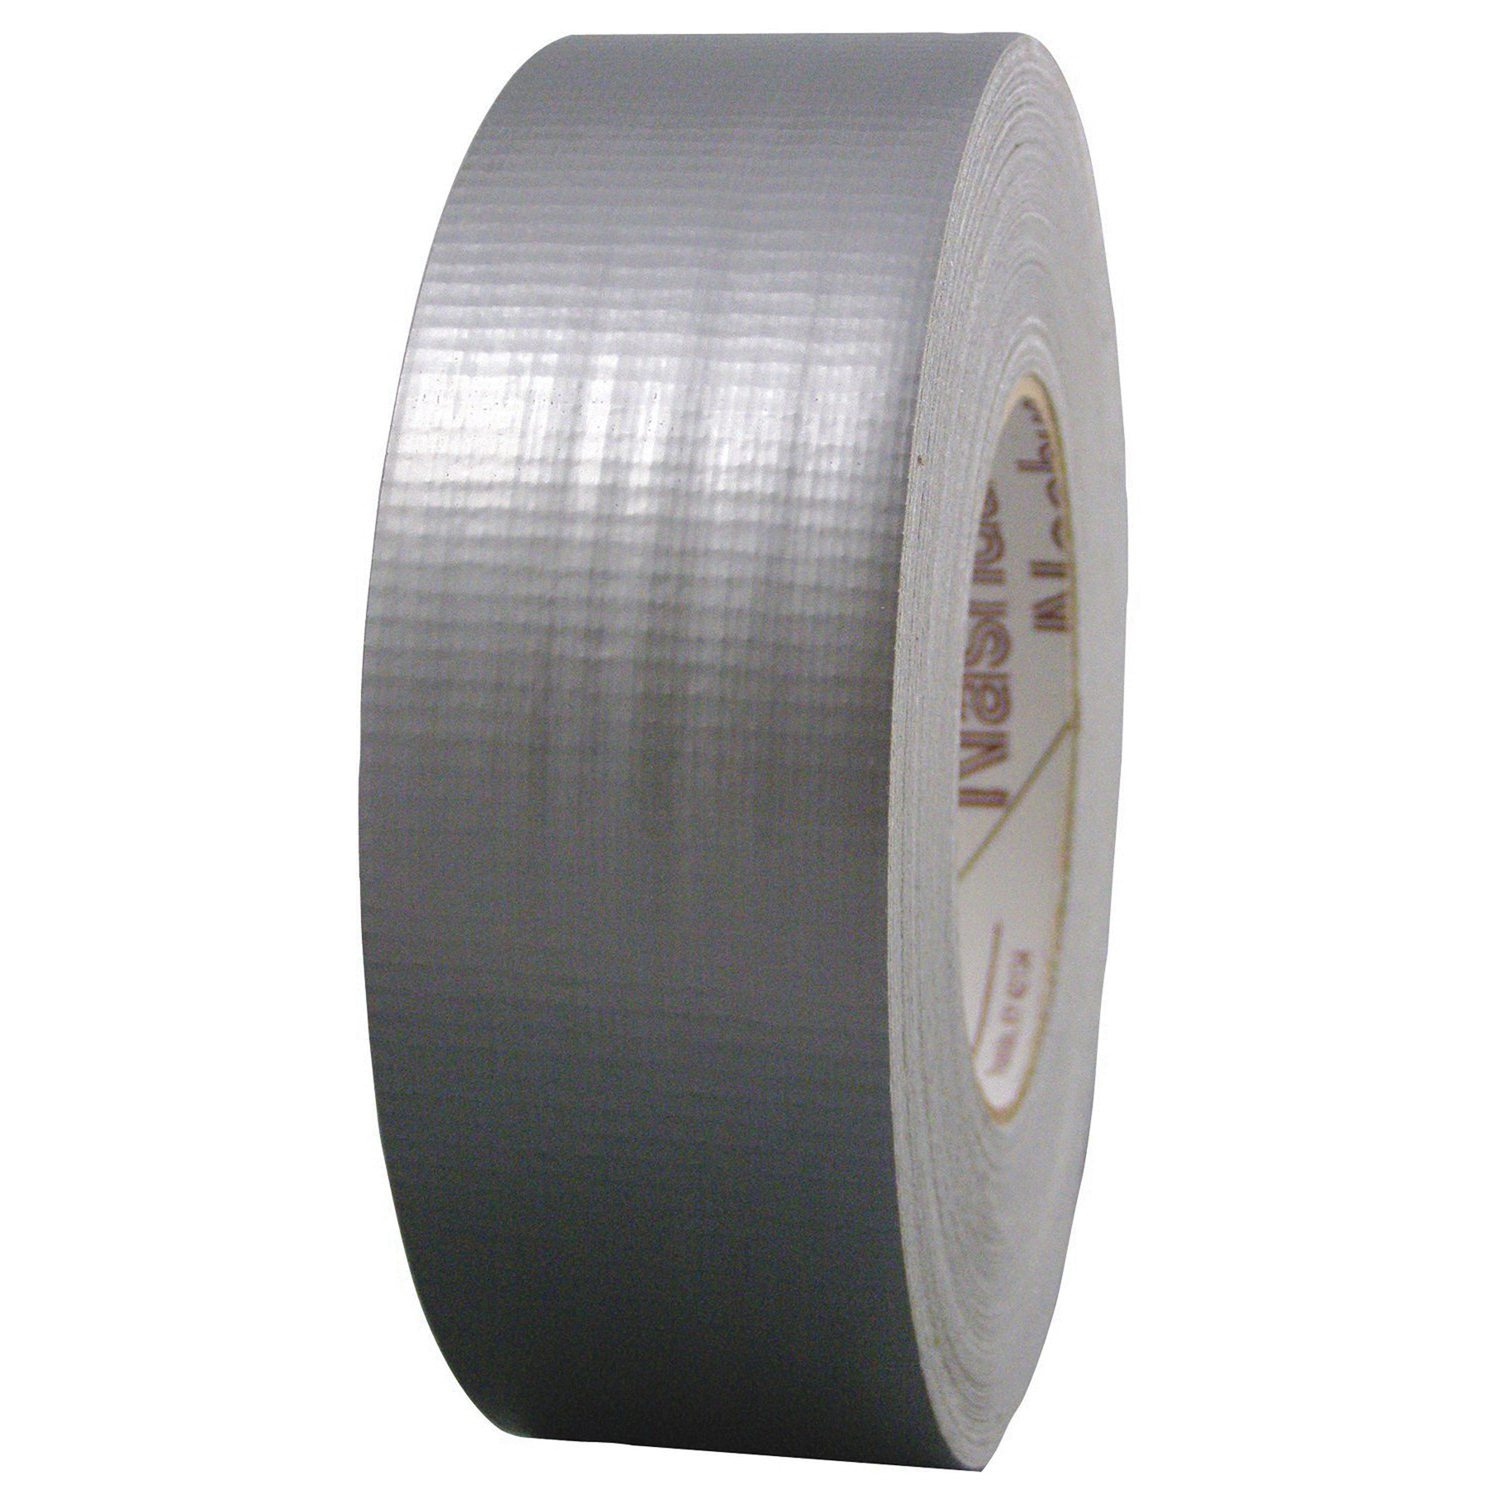 TAPE CLOTH DUCT 2 IN X 60 YDS GREY TAPEDUCT-2GREY